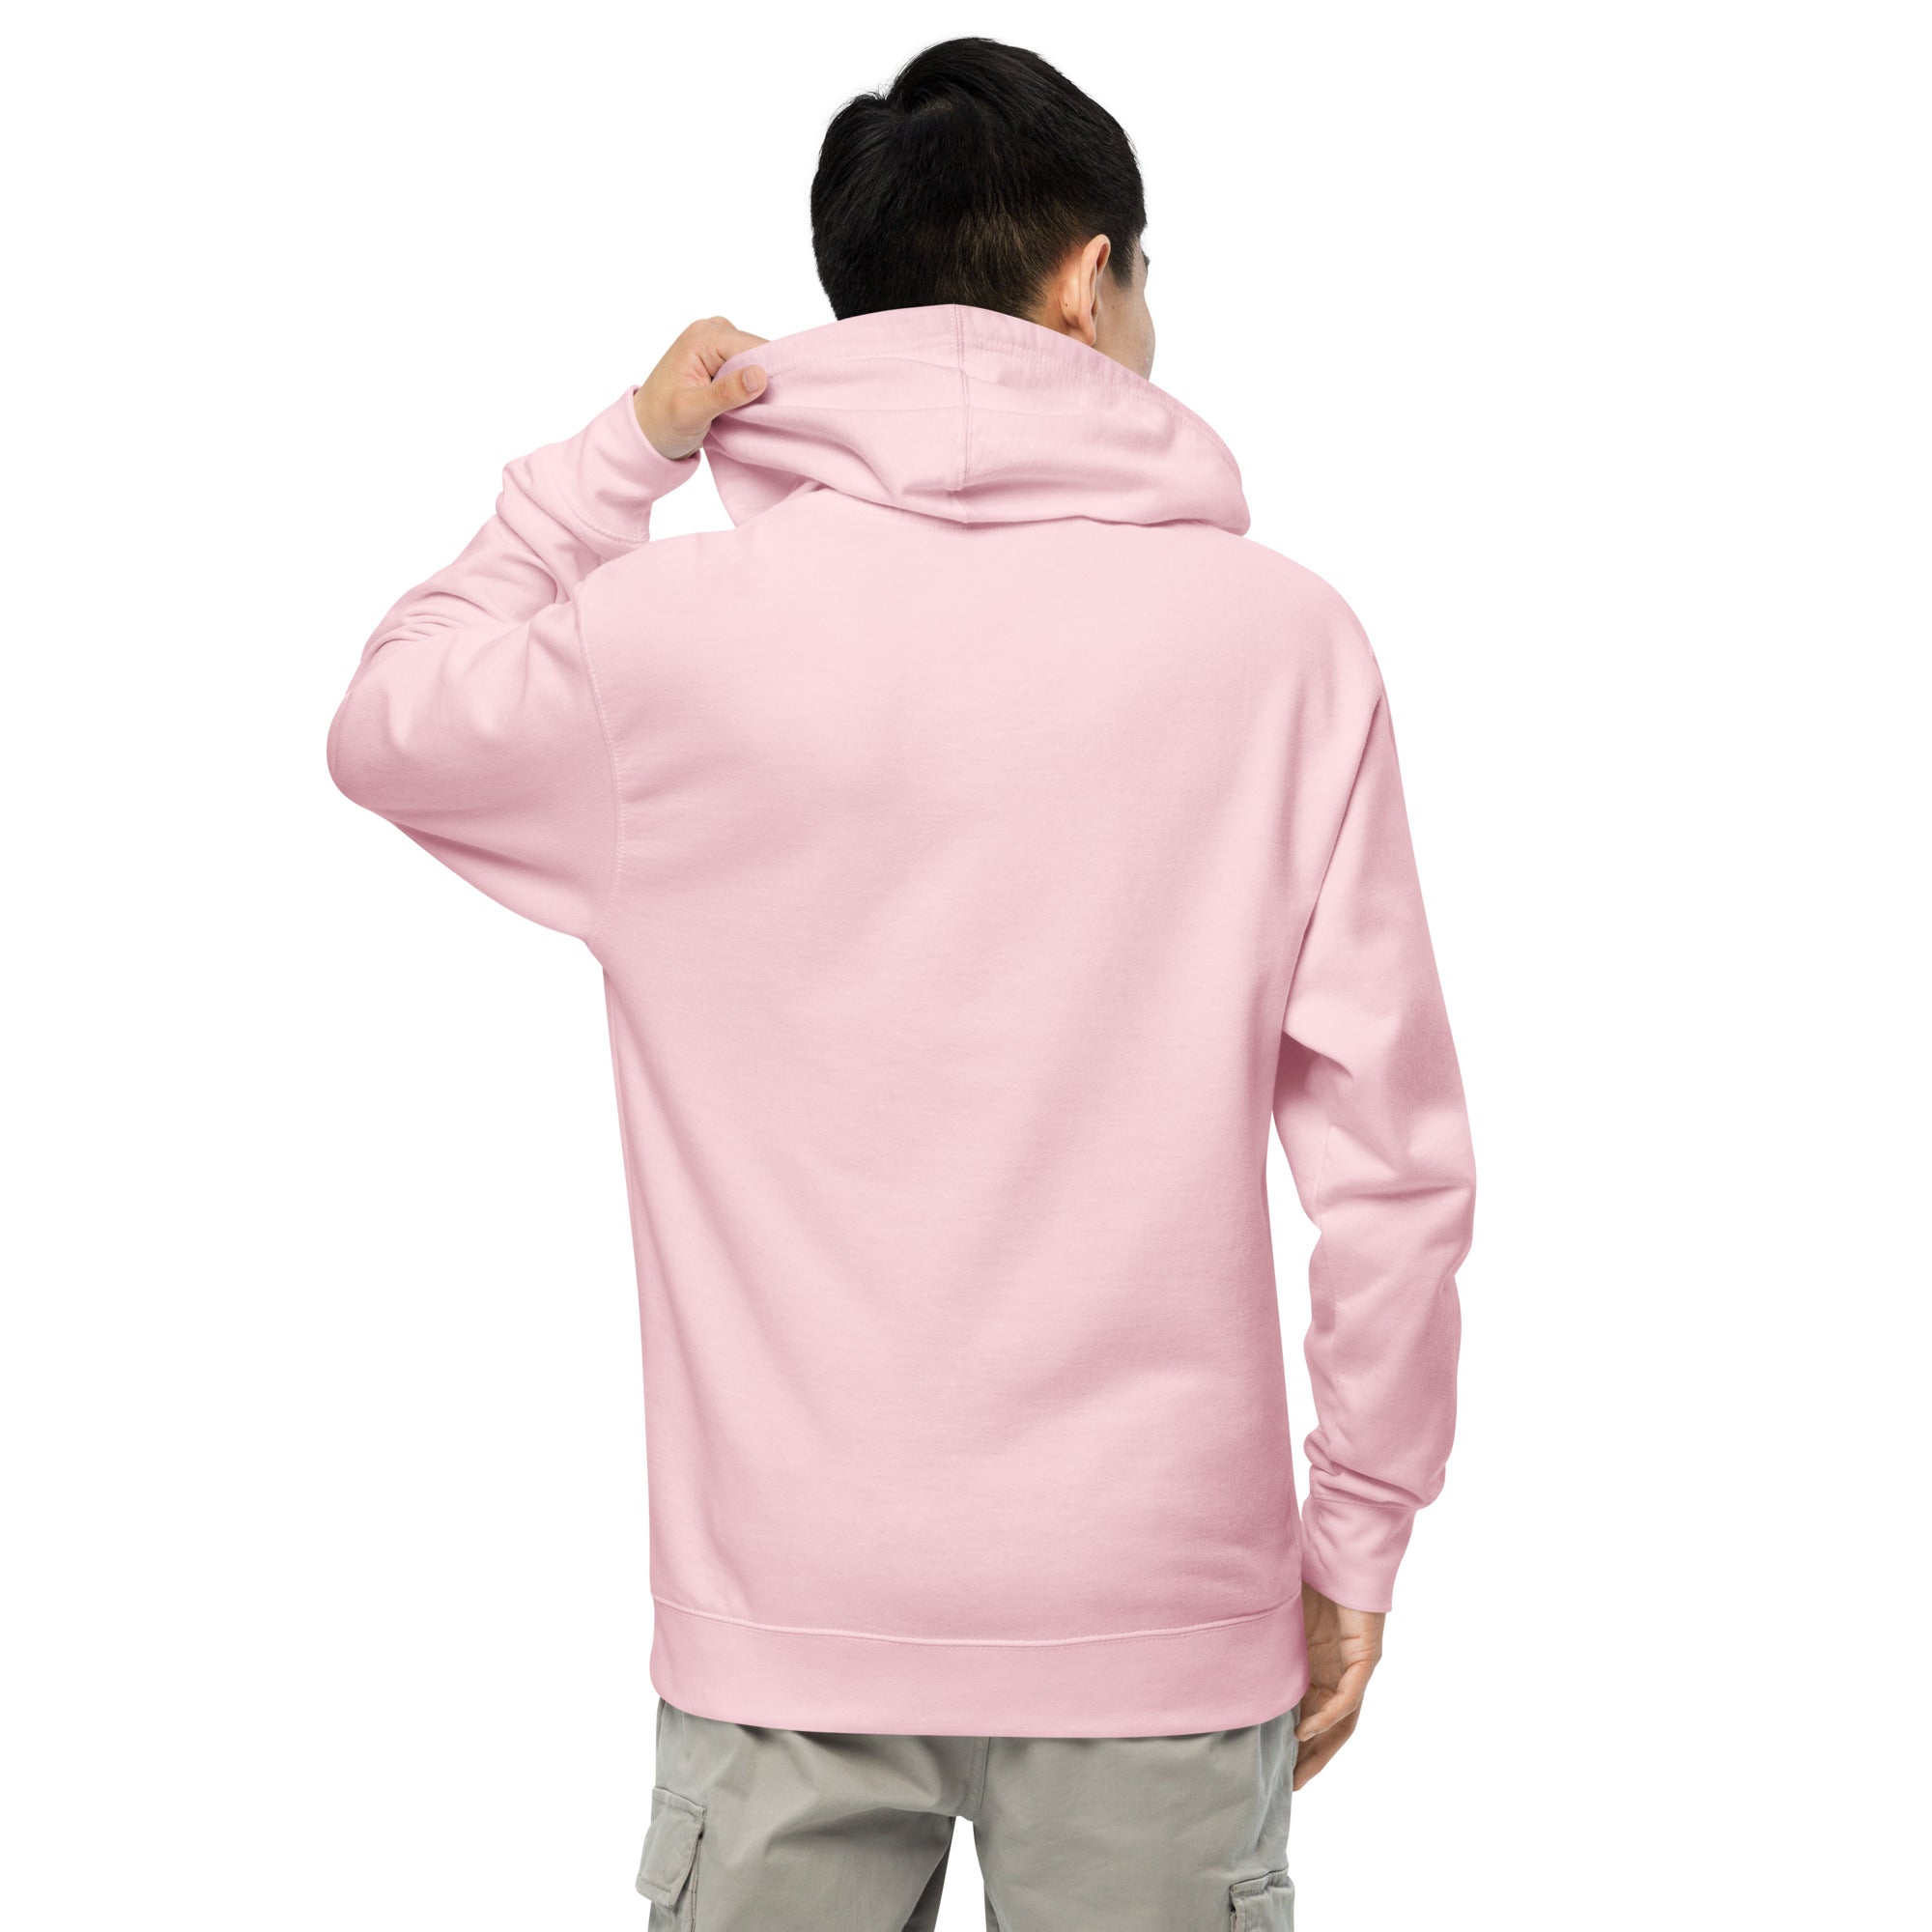 I'm Expensive Motion Genderless Hoodie - Mid-Weight